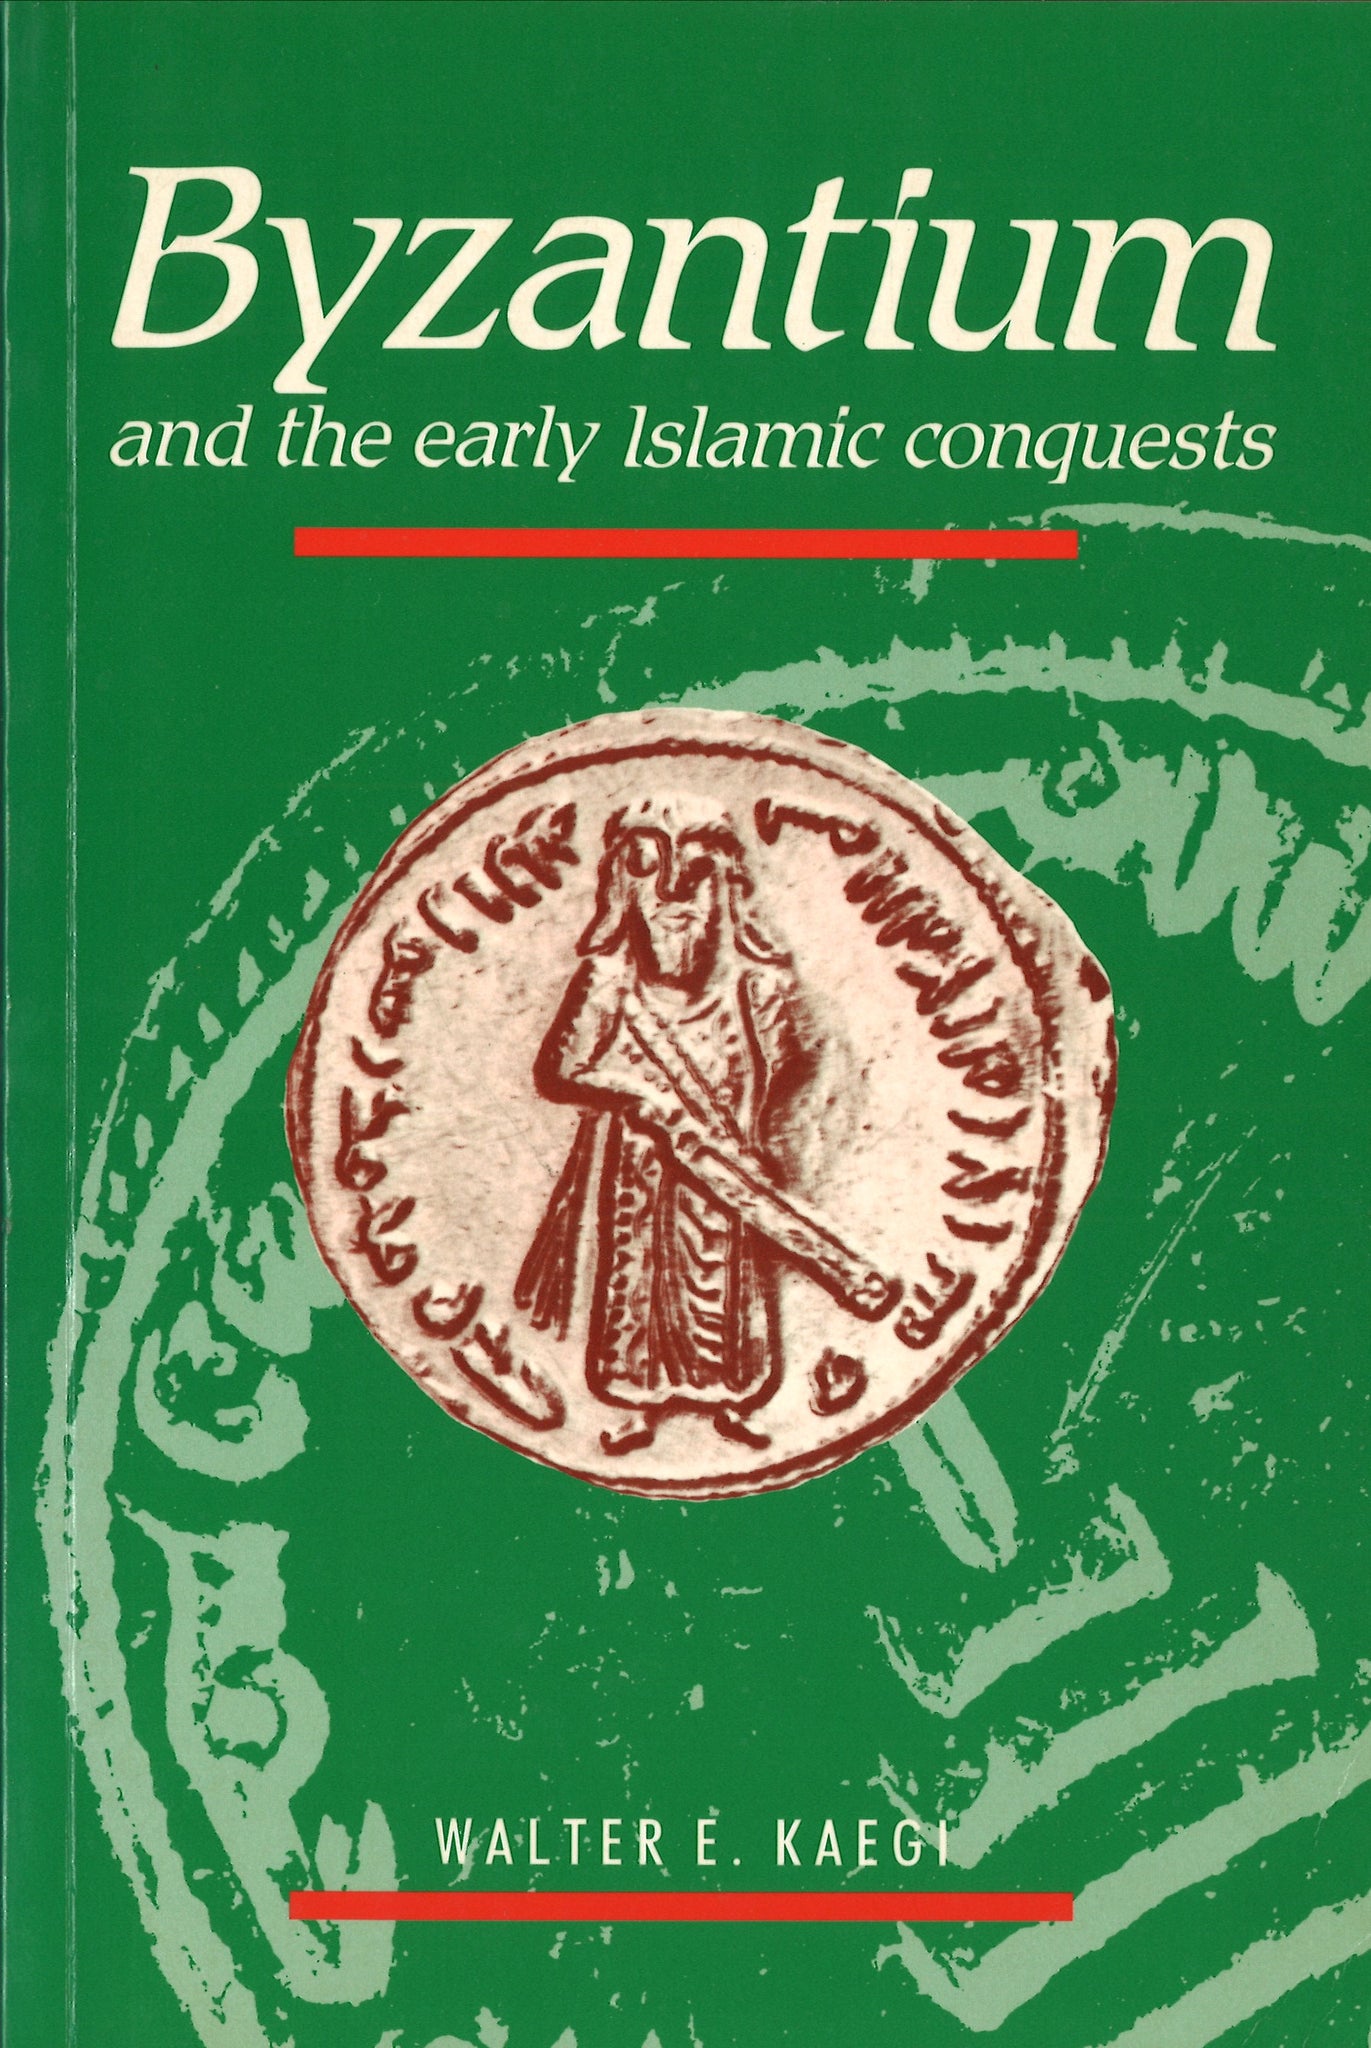 BYZANTIUM AND THE EARLY ISLAMIC CONQUESTS